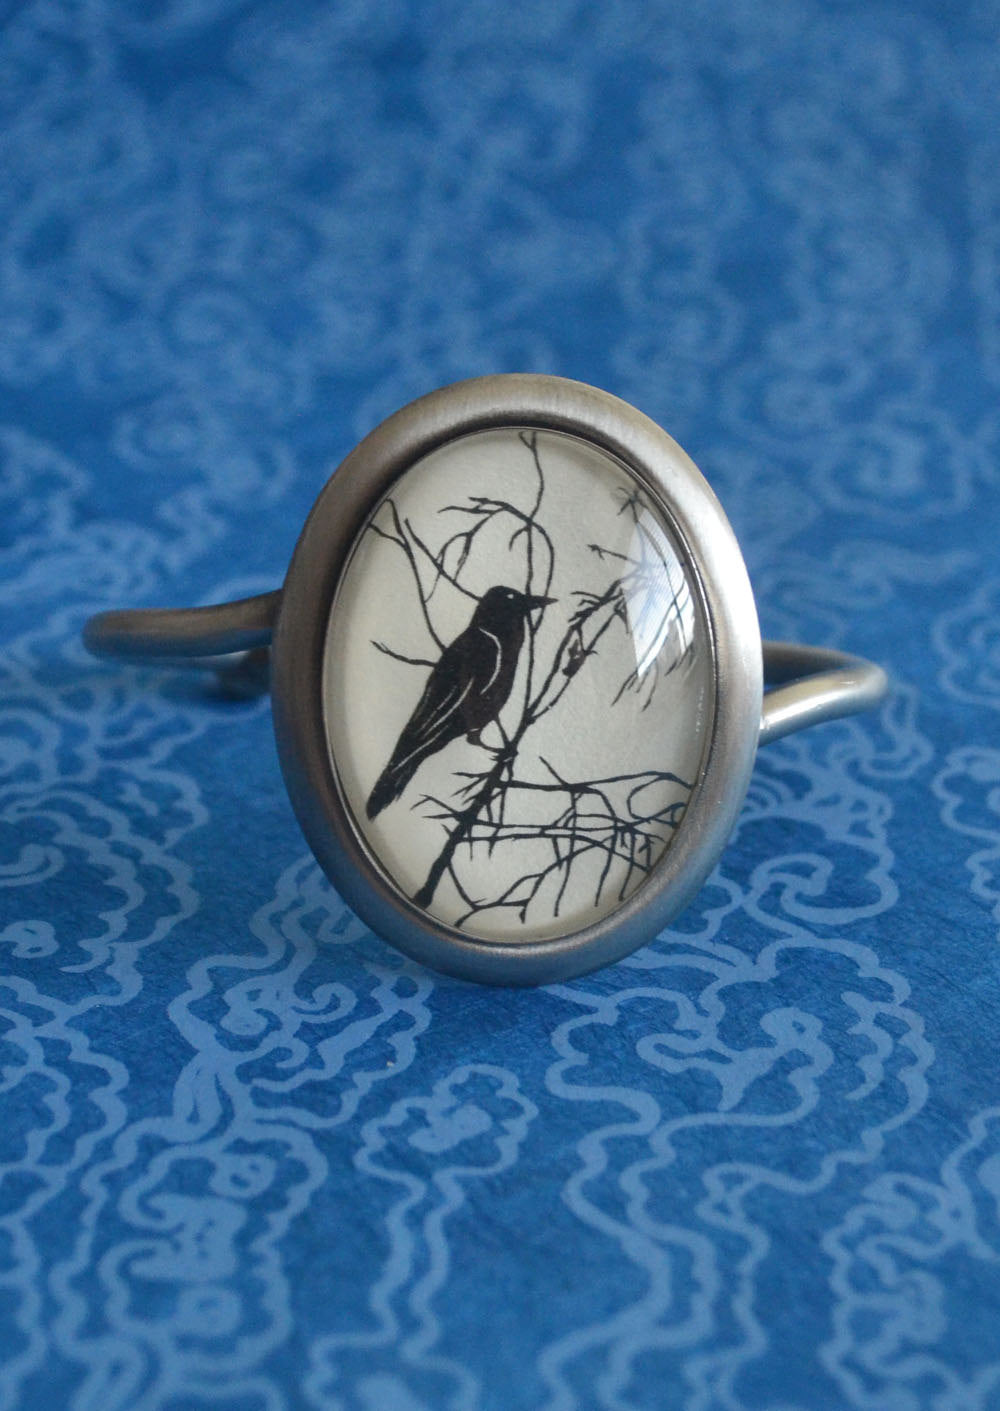 FOR the LOVE of CROWS Bracelet - Silhouette Jewelry